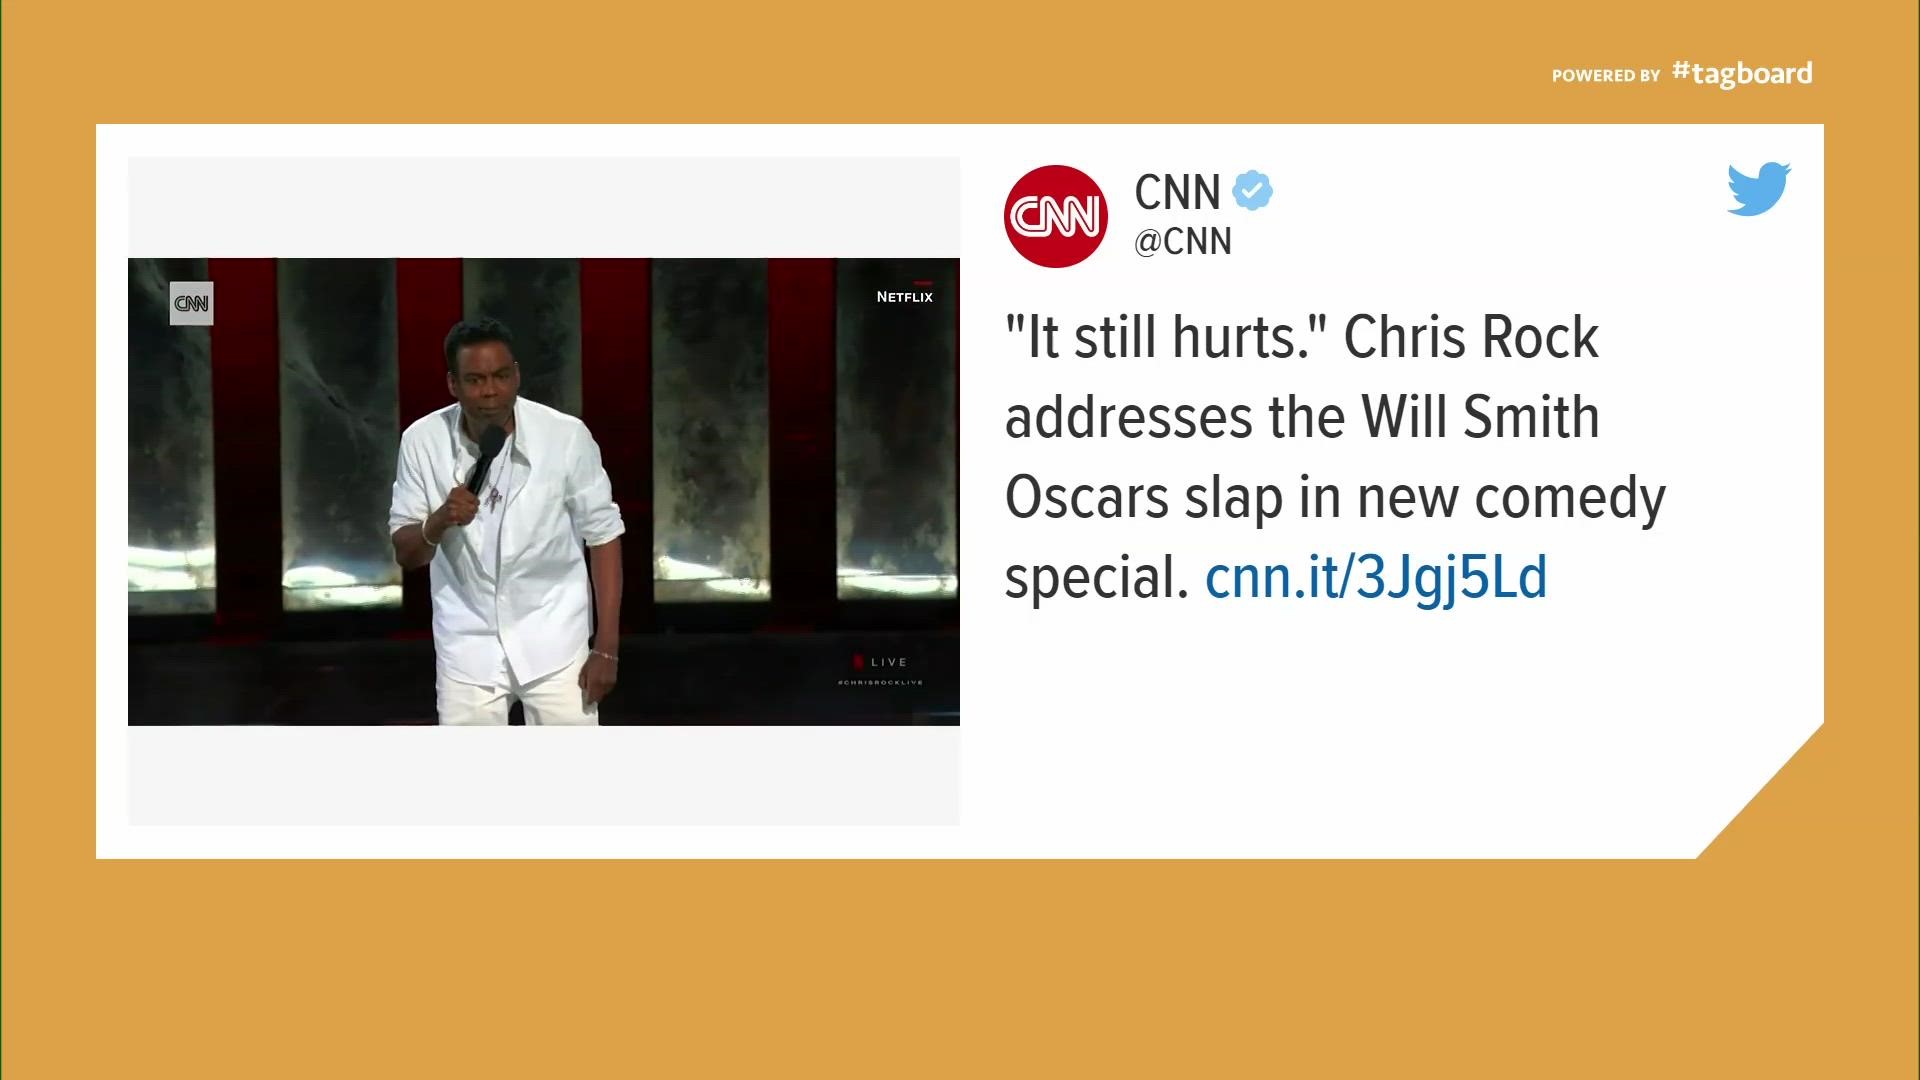 The 58-year-old comedian on Saturday night performed his first stand-up special since last year’s Oscars.